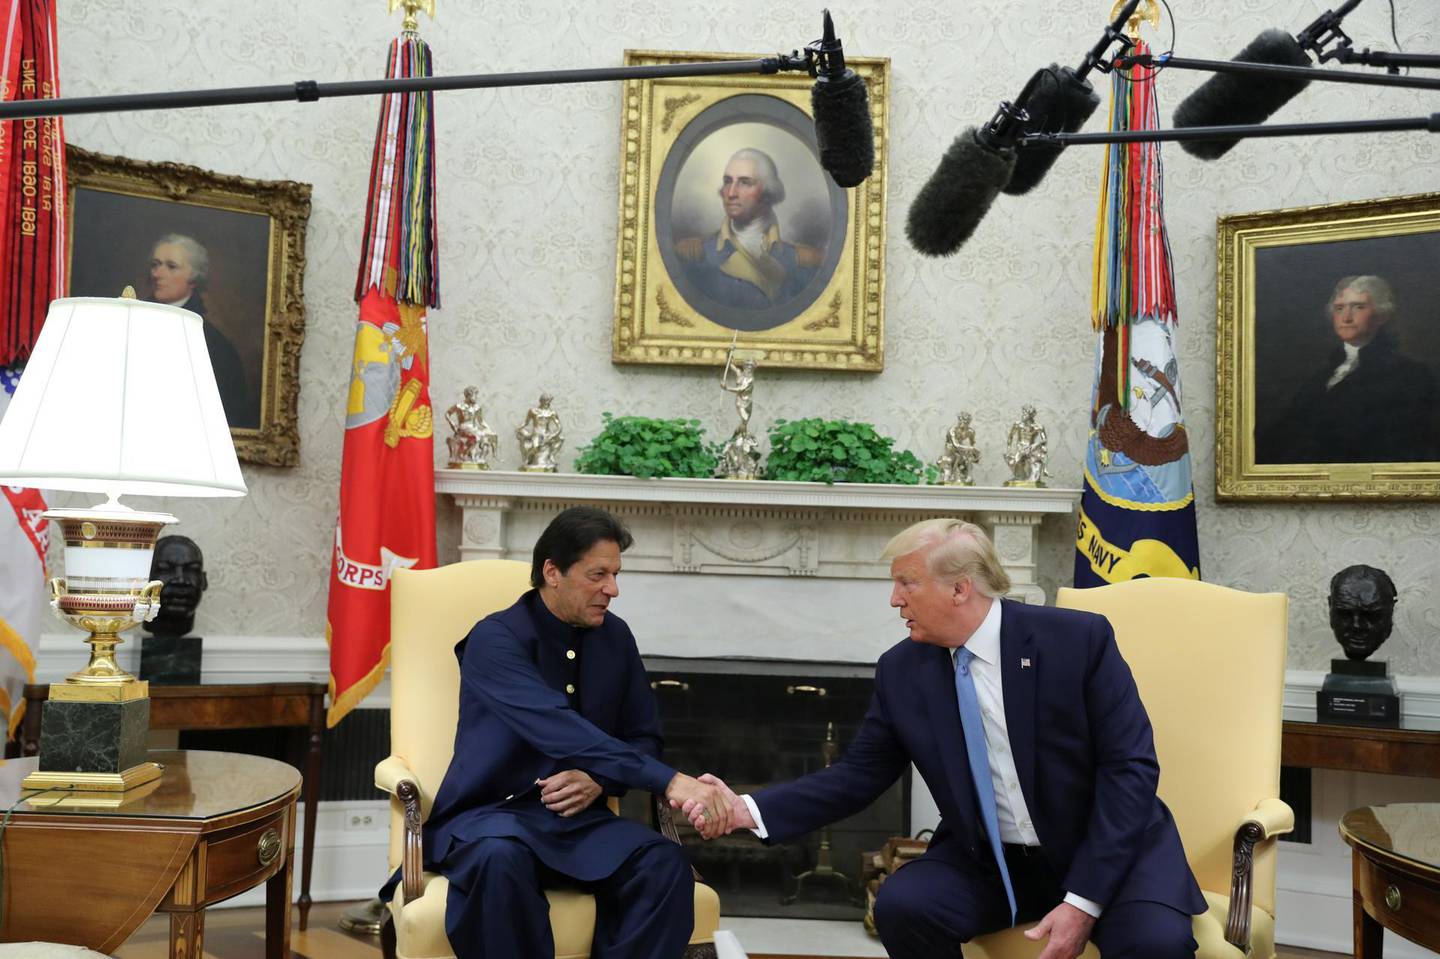 U.S. President Donald Trump greets Pakistan’s Prime Minister Imran Khan in the Oval Office at the White House in Washington, U.S., July 22, 2019. REUTERS/Jonathan Ernst